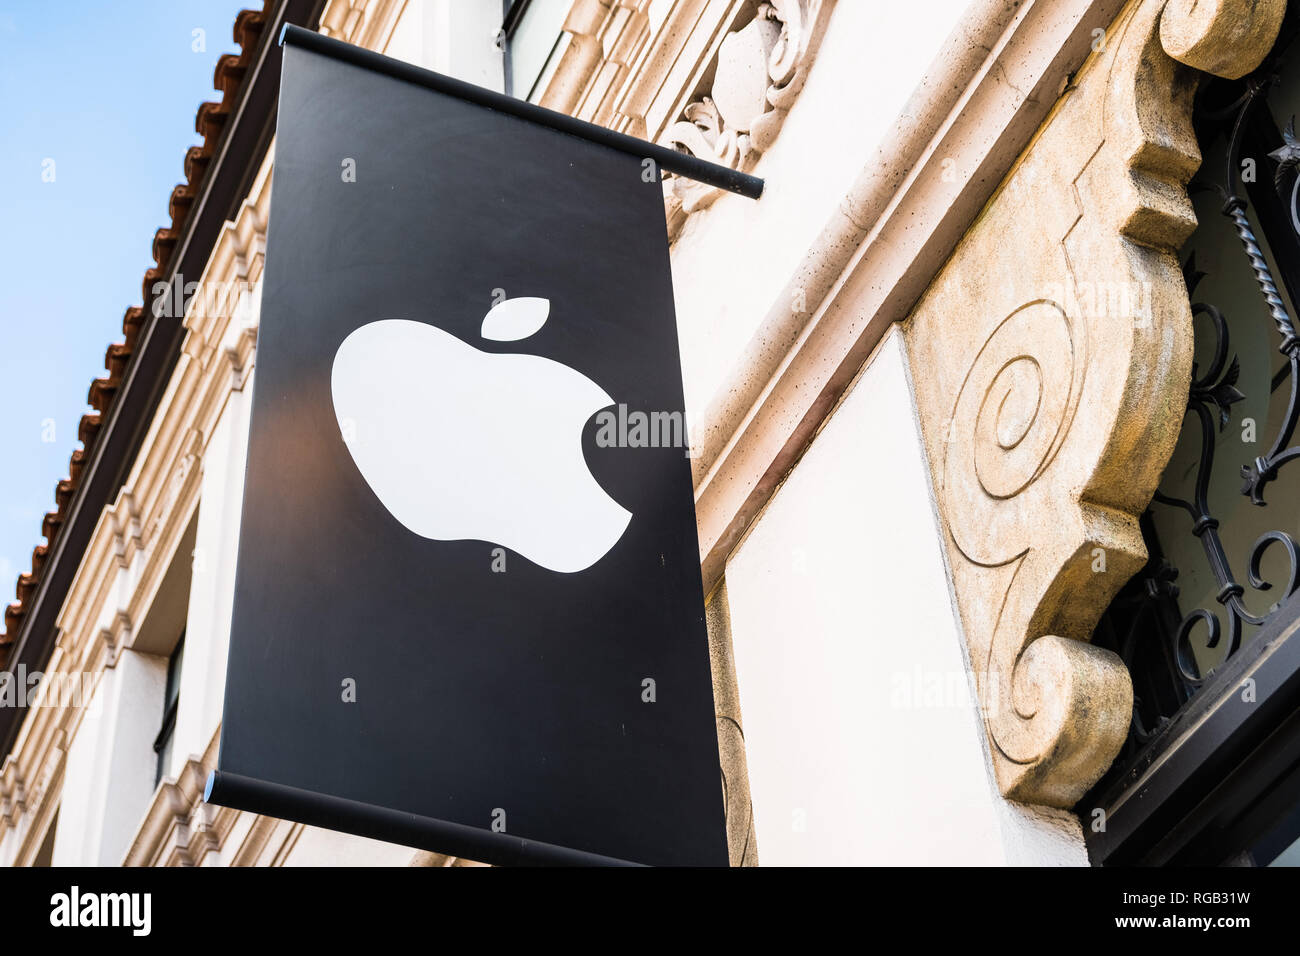 March 15, 2018 Pasadena / CA / USA - Apple logo above the entrance to the store located in an old building downtown Pasadena Stock Photo